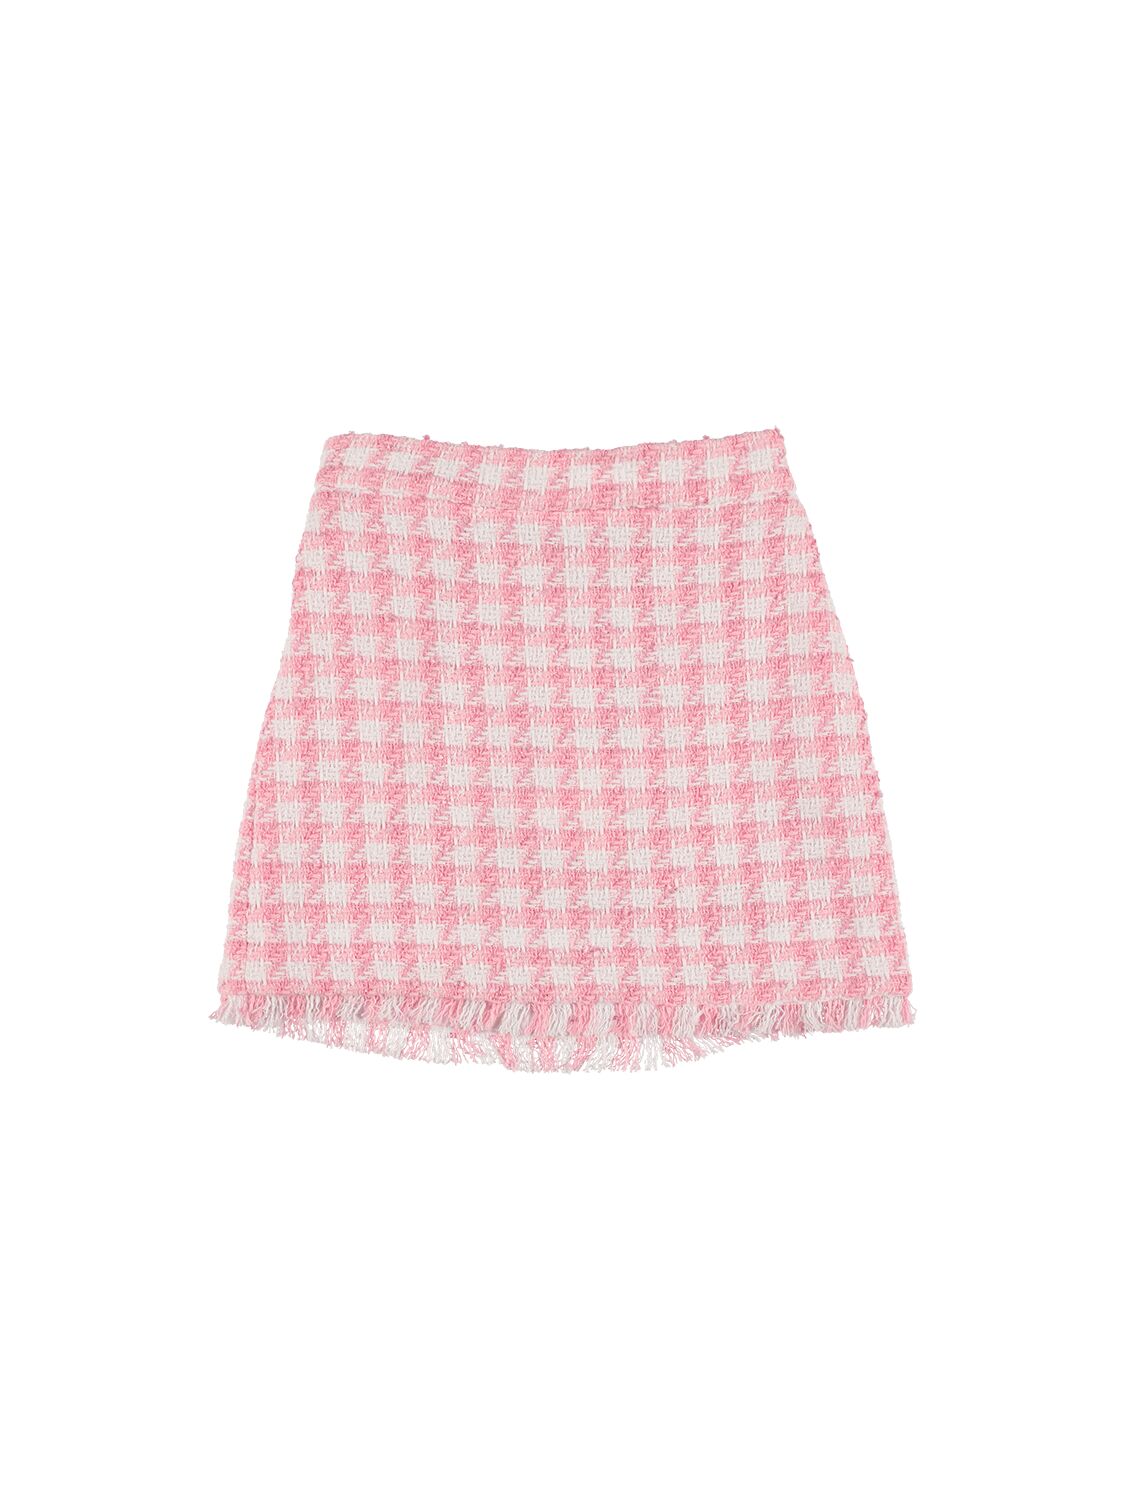 Image of Houndstooth Cotton Bouclé Skirt